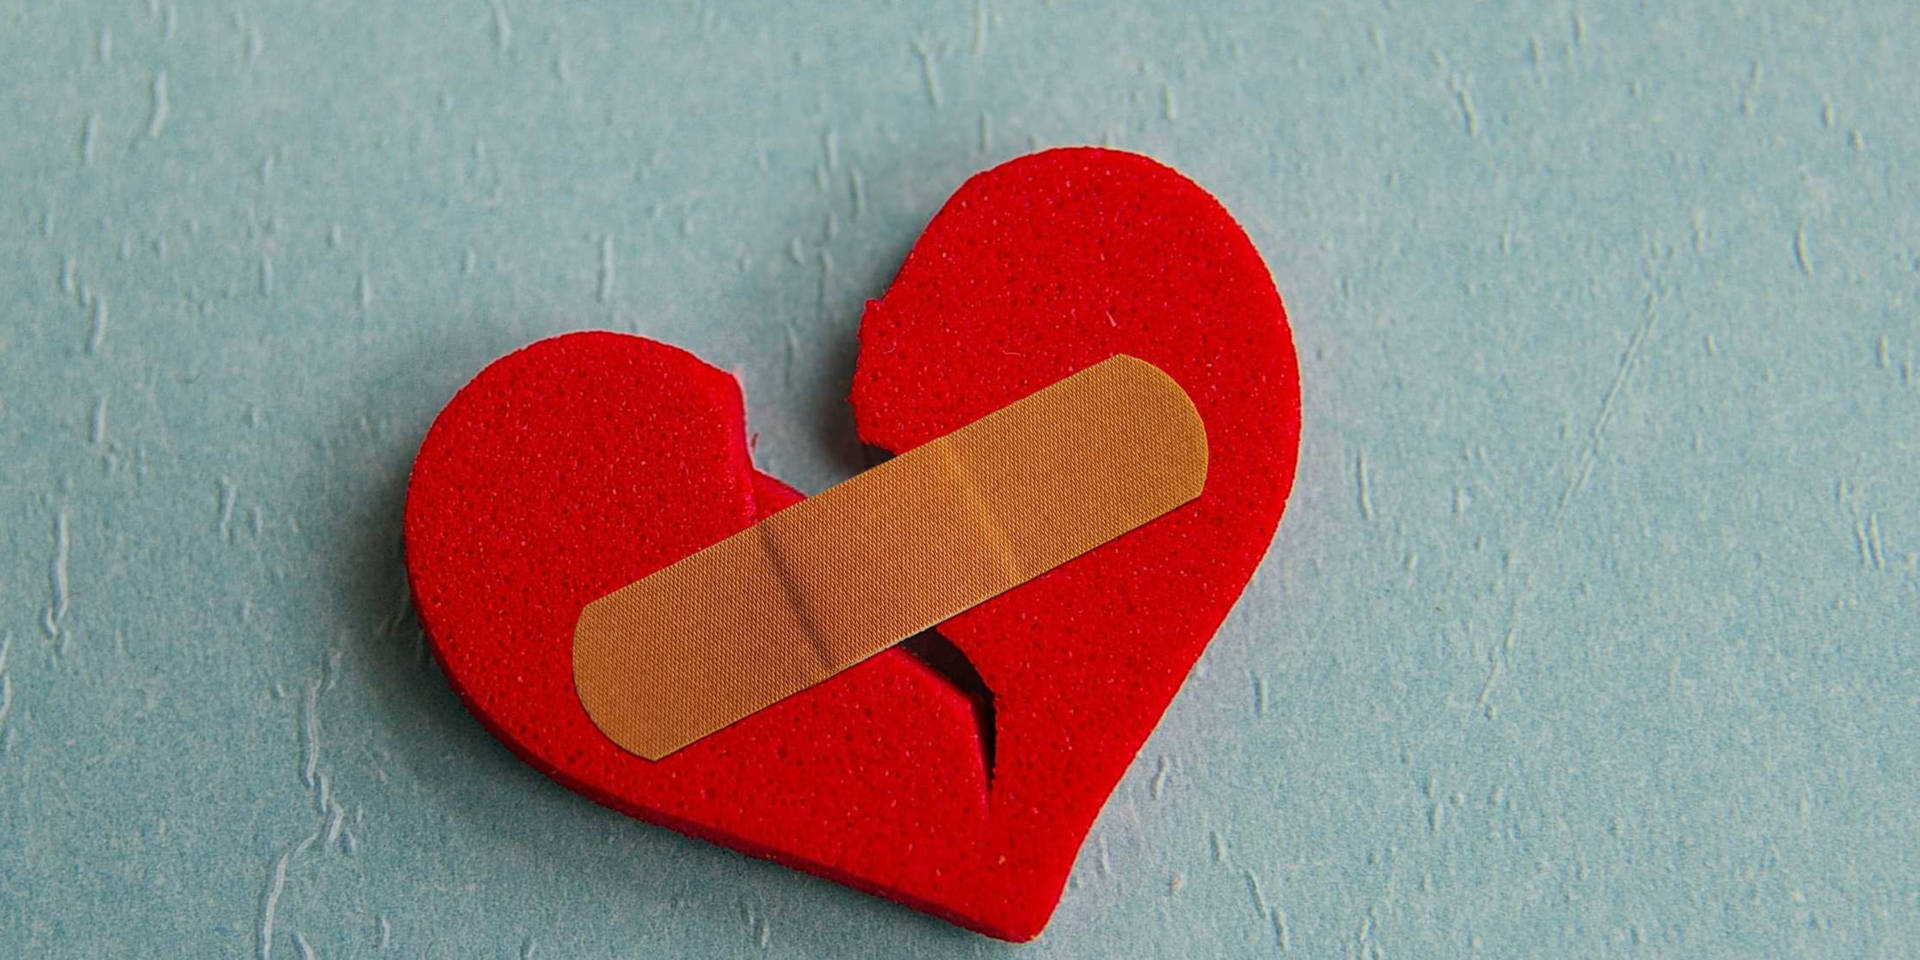 Broken Heart Stock Photos and Images - 123RF